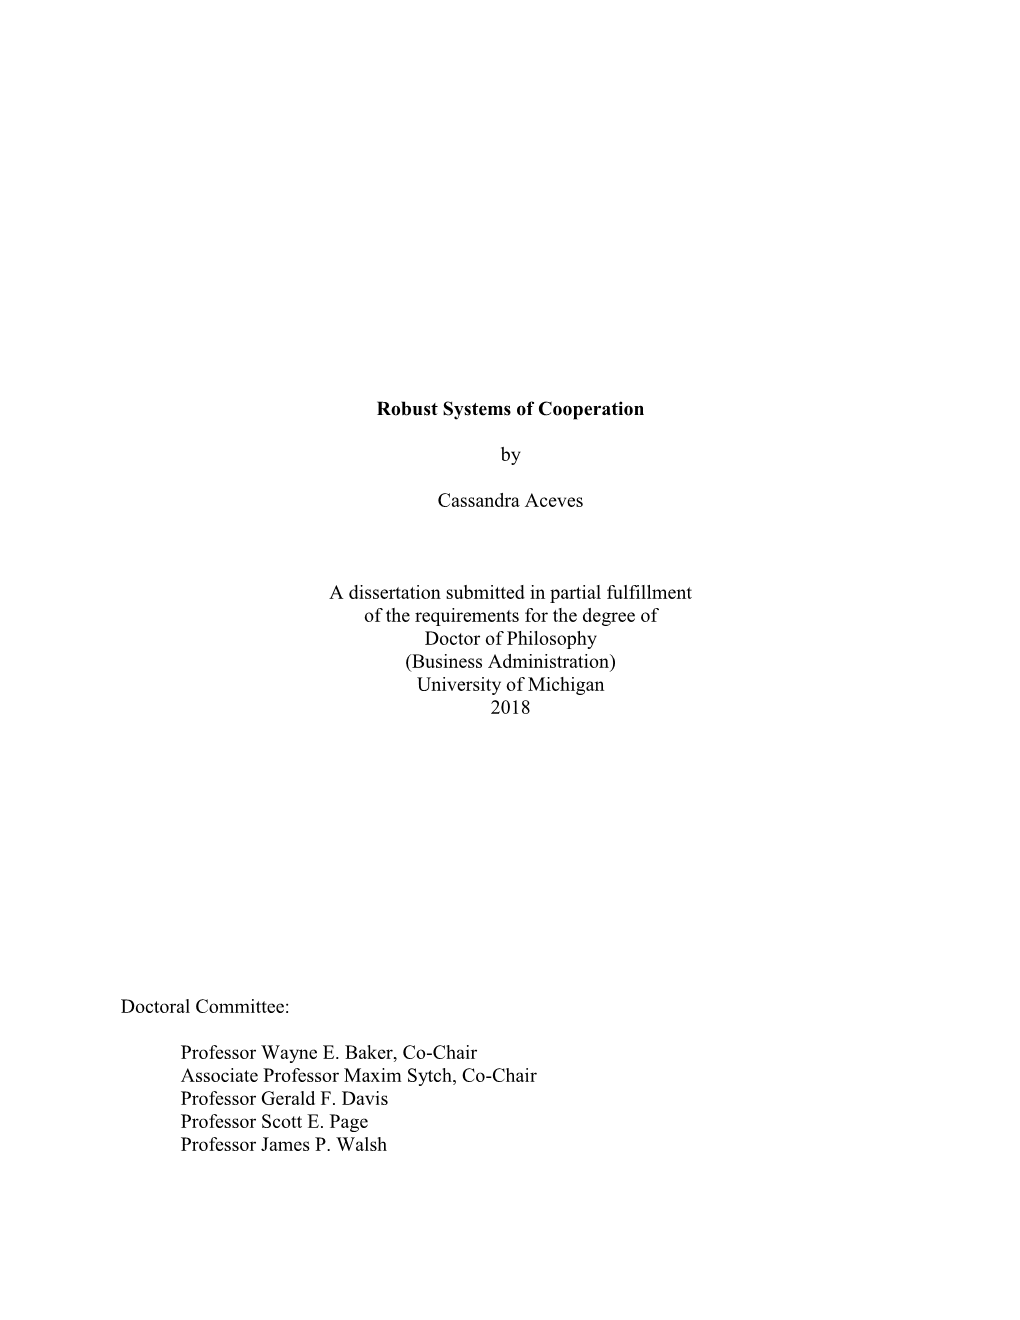 Robust Systems of Cooperation by Cassandra Aceves a Dissertation